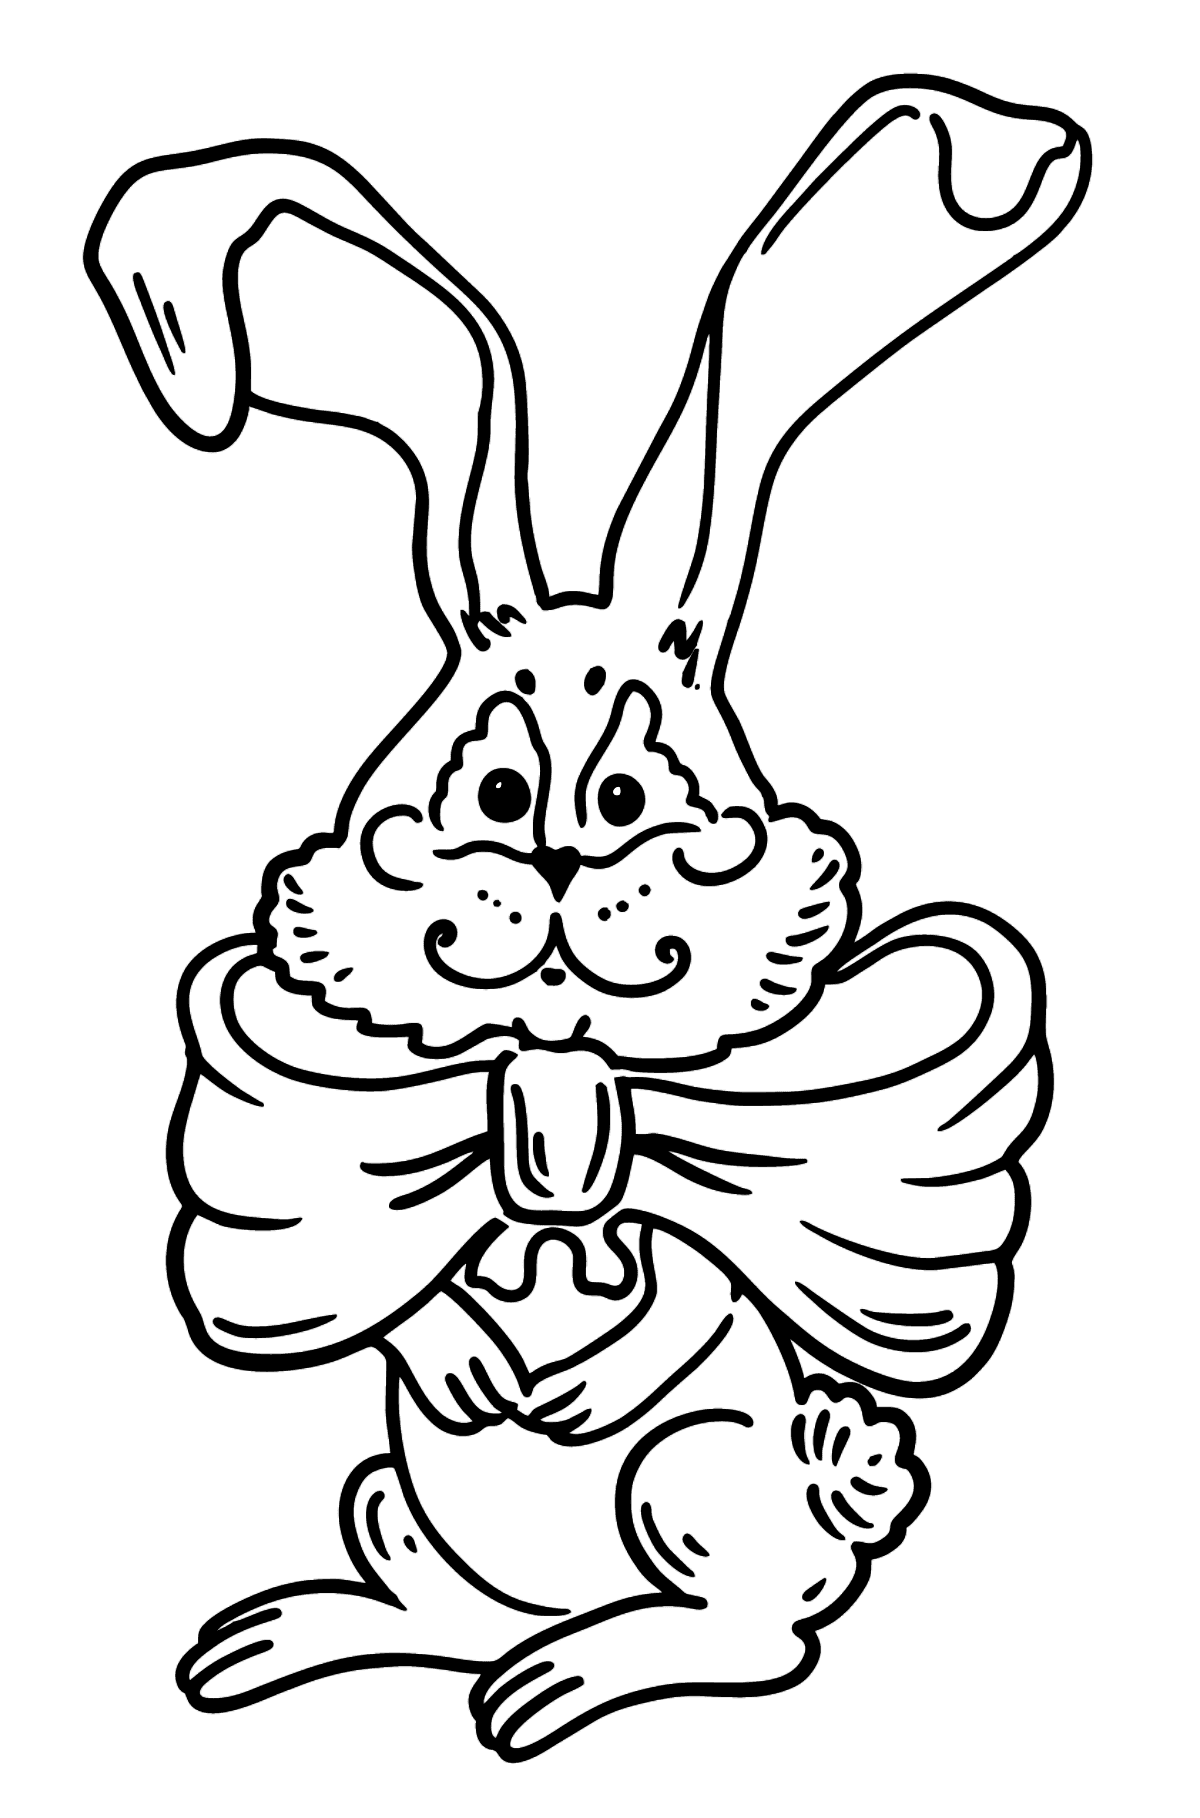 Bunny with a Bow coloring page - Coloring Pages for Kids